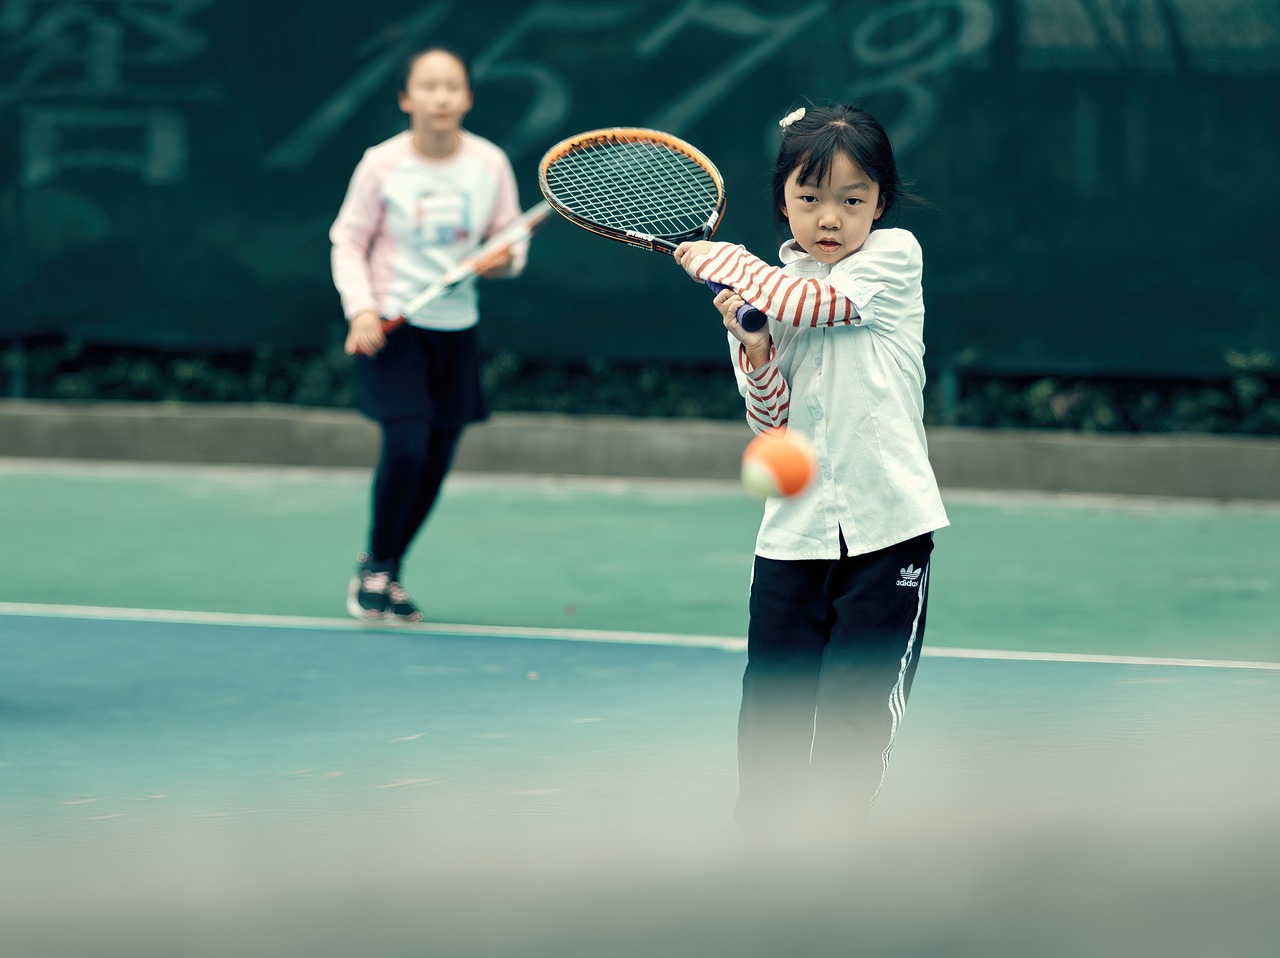 Tennis training and resources for all key stages